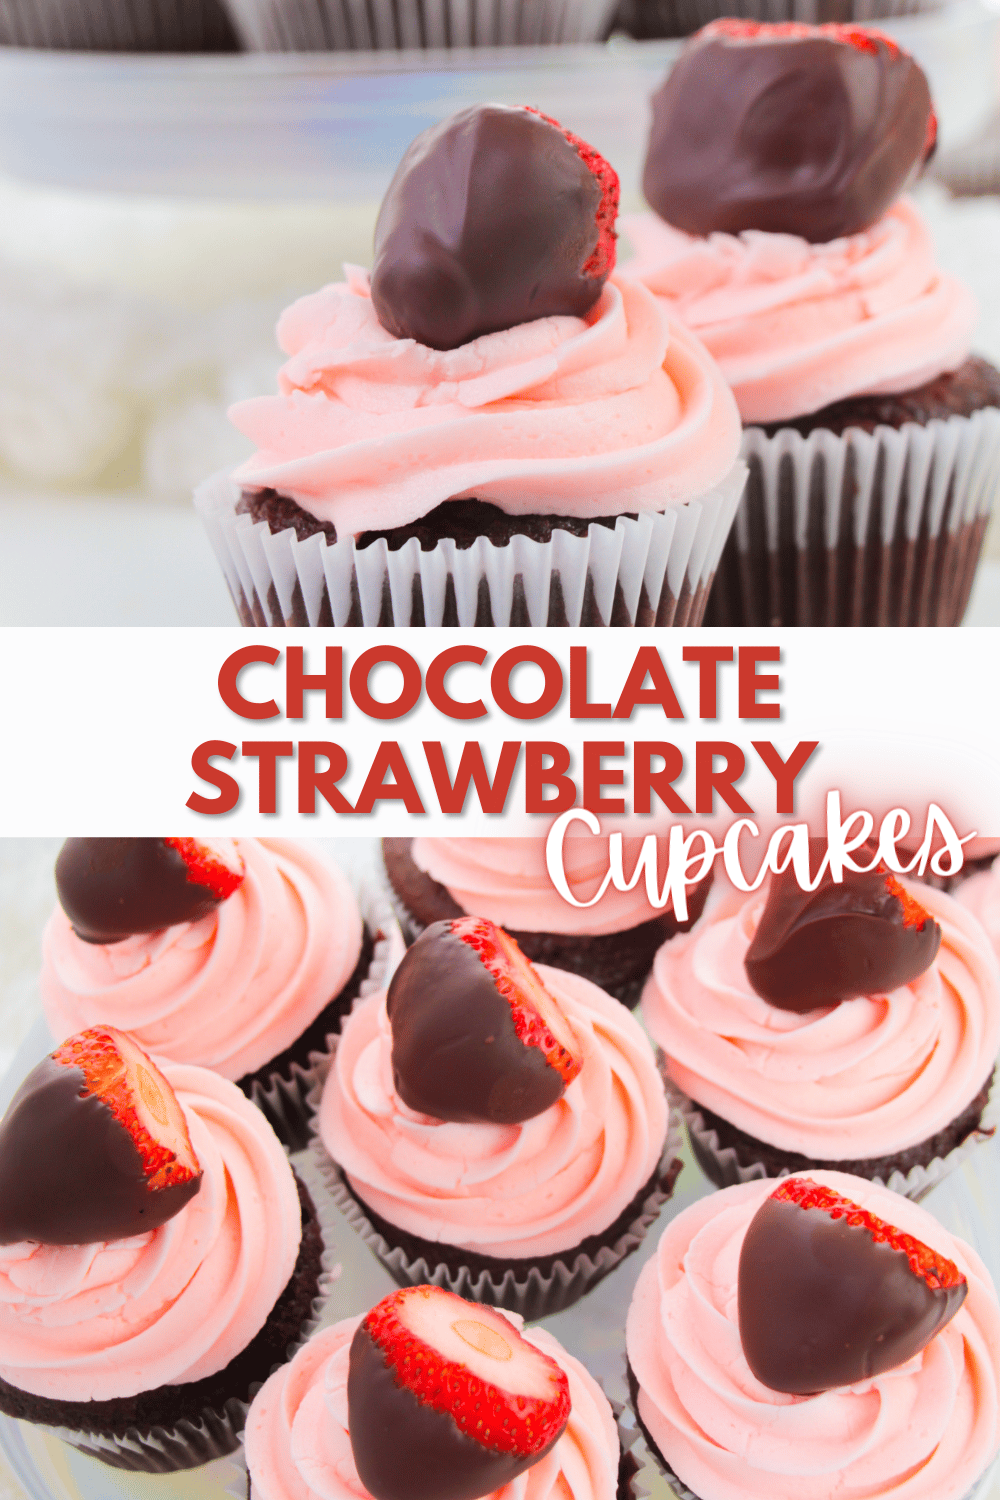 These Chocolate Strawberry Cupcakes are delicious treats topped with strawberry buttercream frosting and a chocolate covered strawberry. #chocolatestrawberrycupcakes #chocolatecoveredstrawberry #strawberrybuttercreamfrosting #chocolatecupcakes #valentinesday via @wondermomwannab